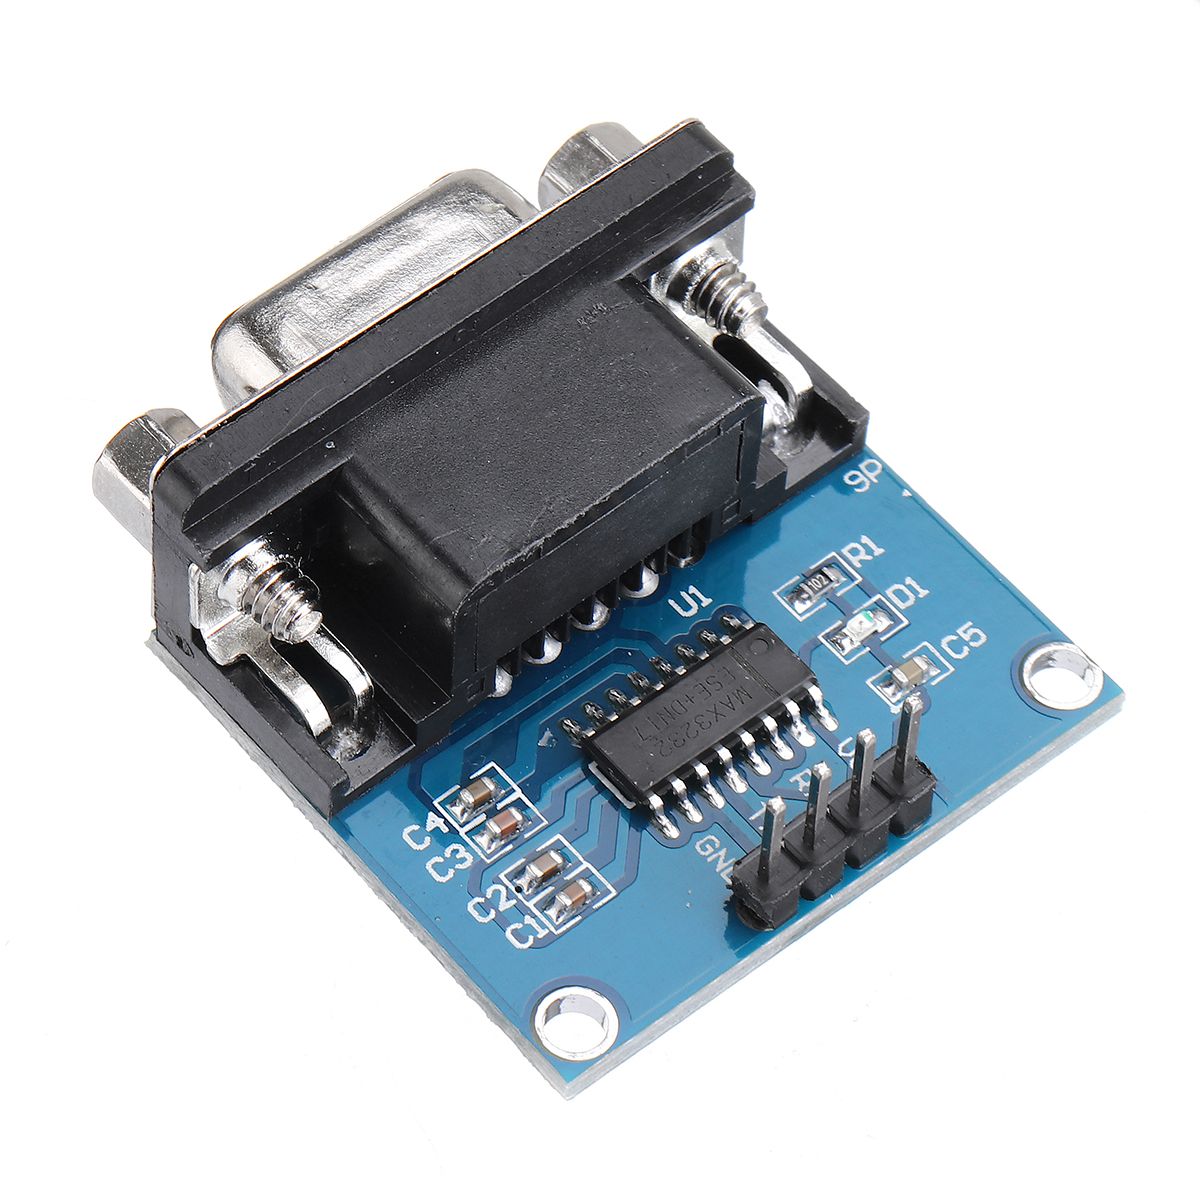 10pcs-RS232-to-TTL-Serial-Port-Converter-Module-DB9-Connector-MAX3232-Serial-Module-1527327